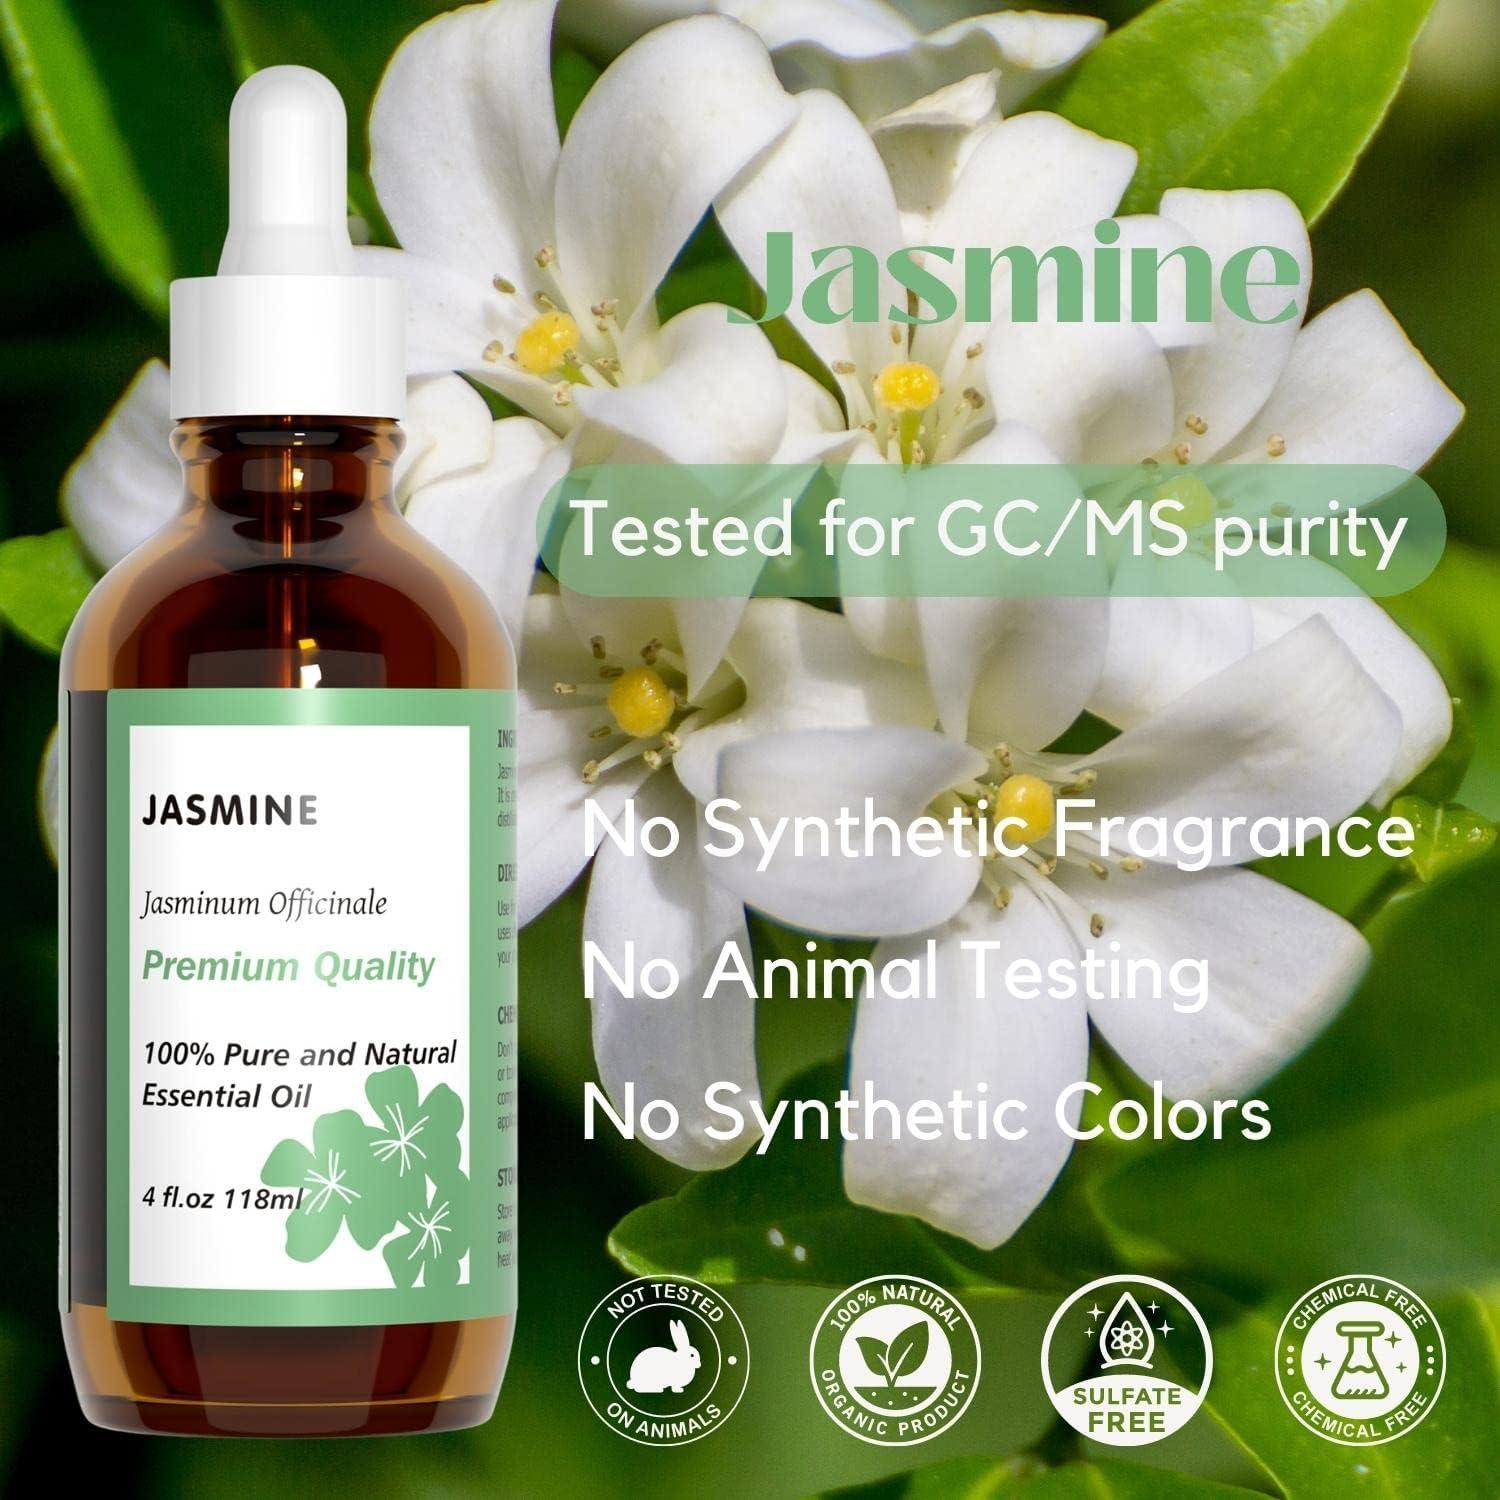 Benefits of Jasmine Oils & why is it crucial for great skin.